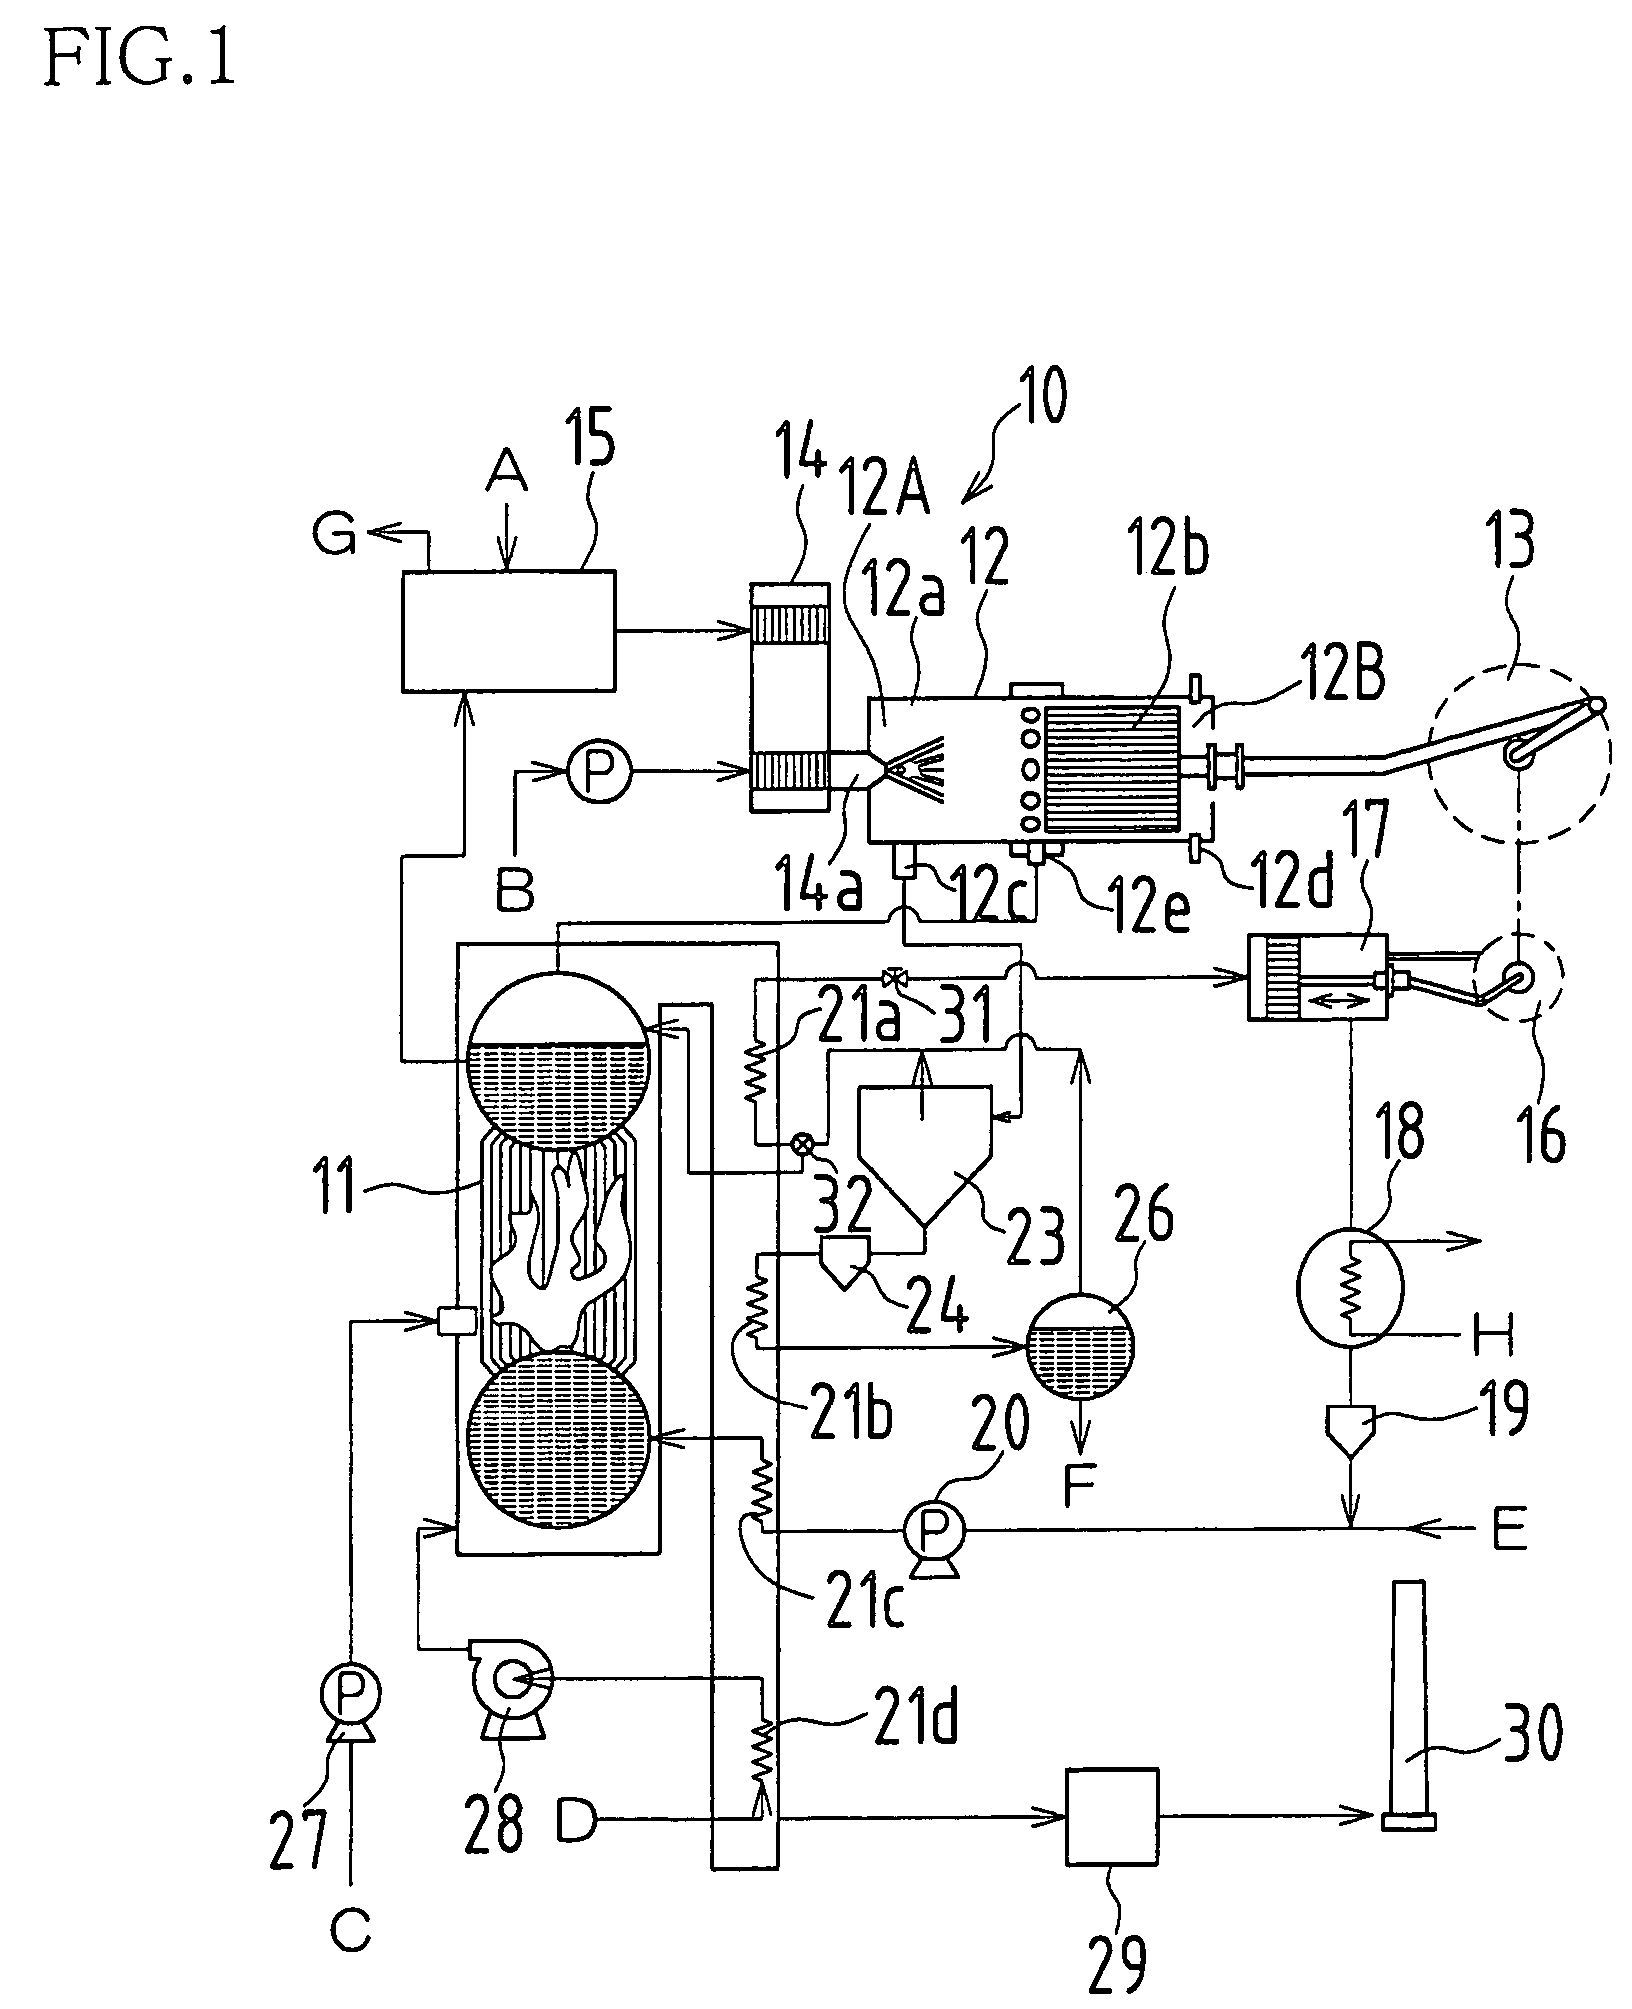 Reaction apparatus for organic and/or other substances employing supercritical fluid or subcritical fluid